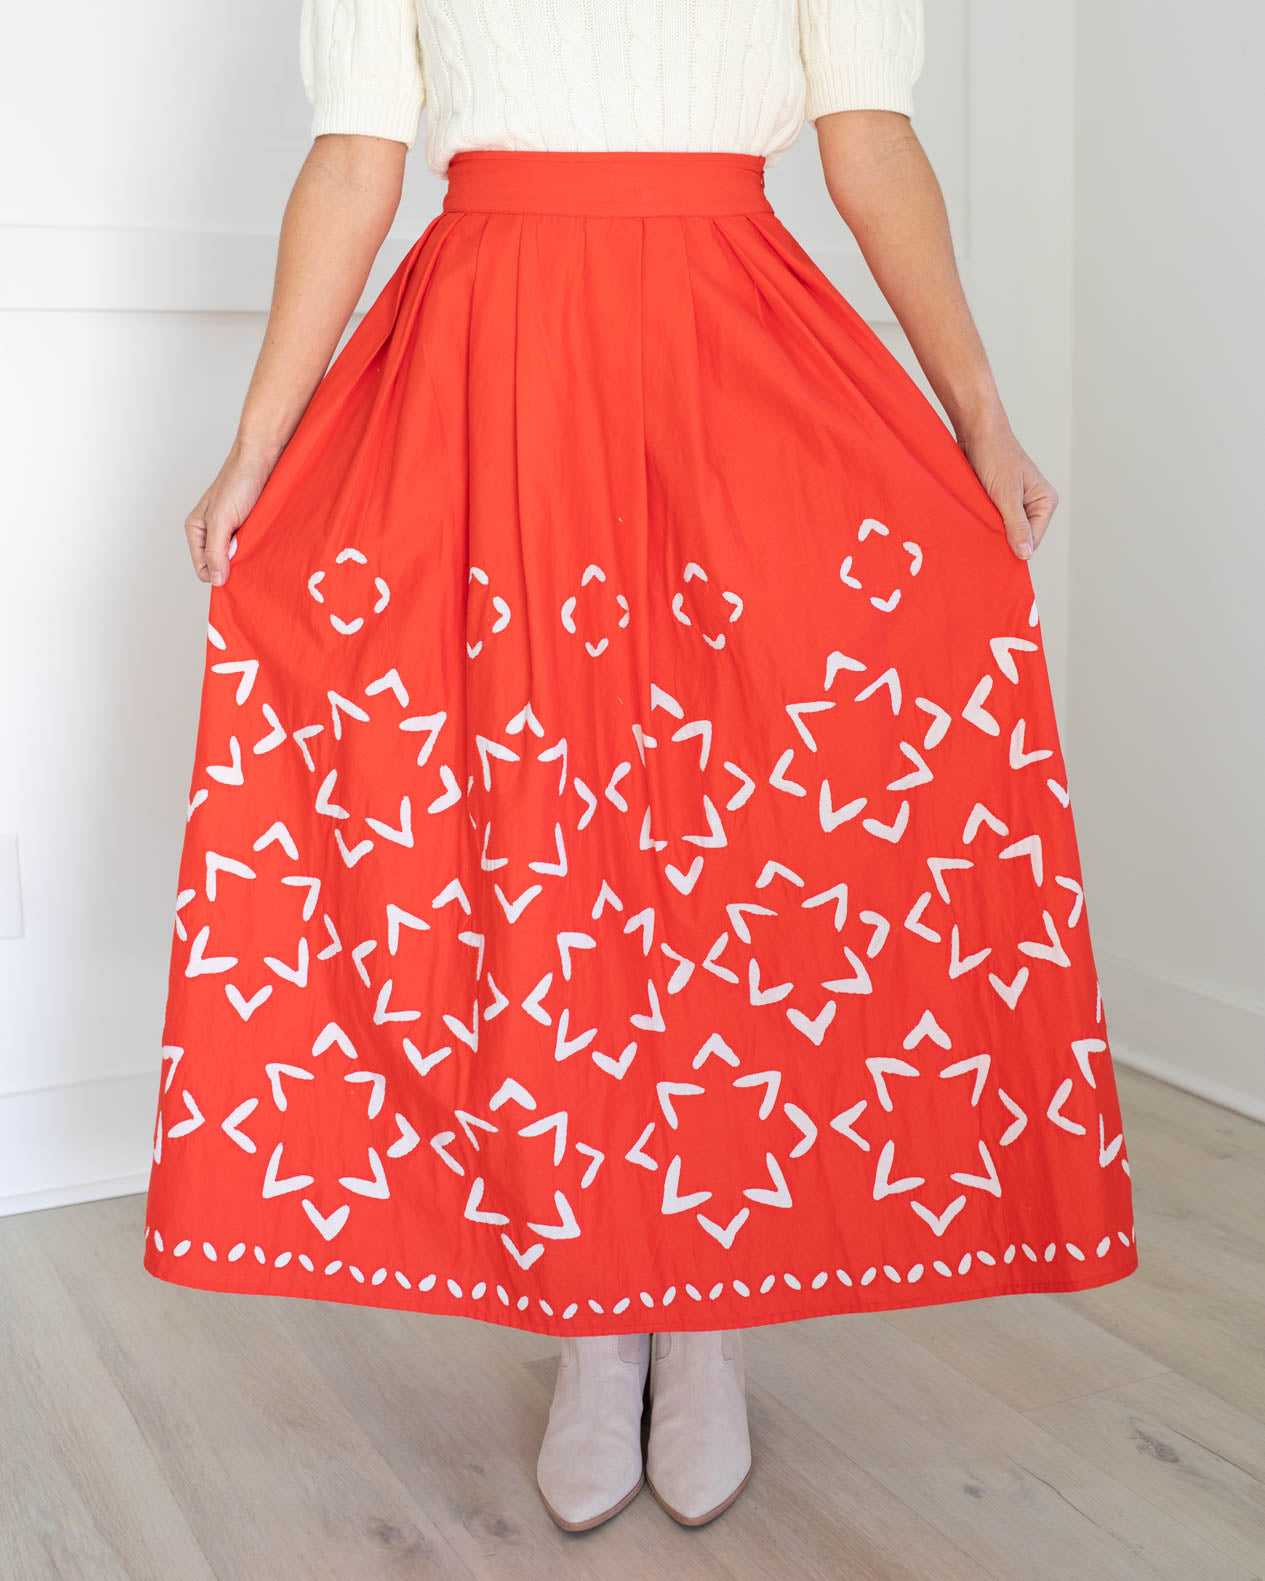 Red with White Applique Skirting